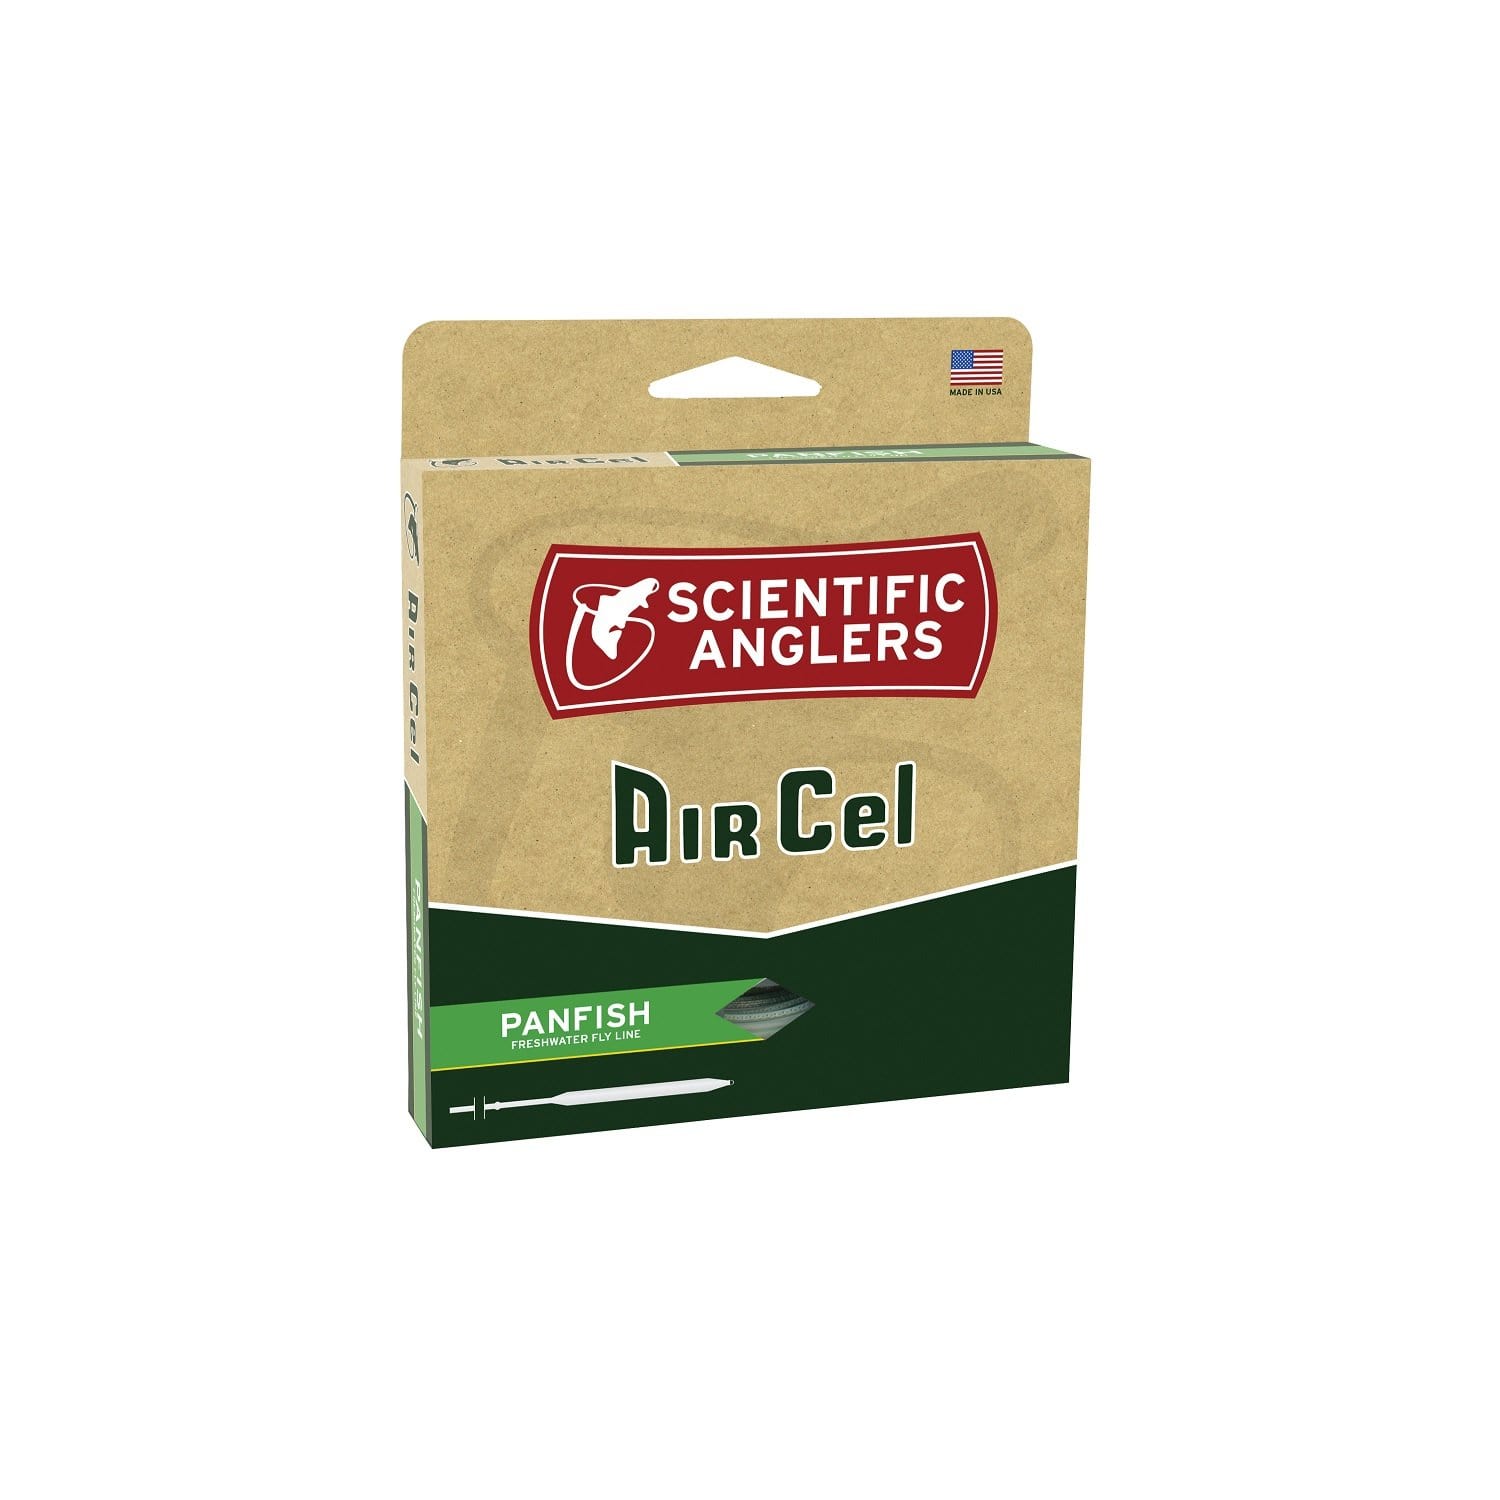 Scientific Anglers Fishing : Line Scientific Anglers AirCel Floating Panfish Fly Line-5 6-Orng